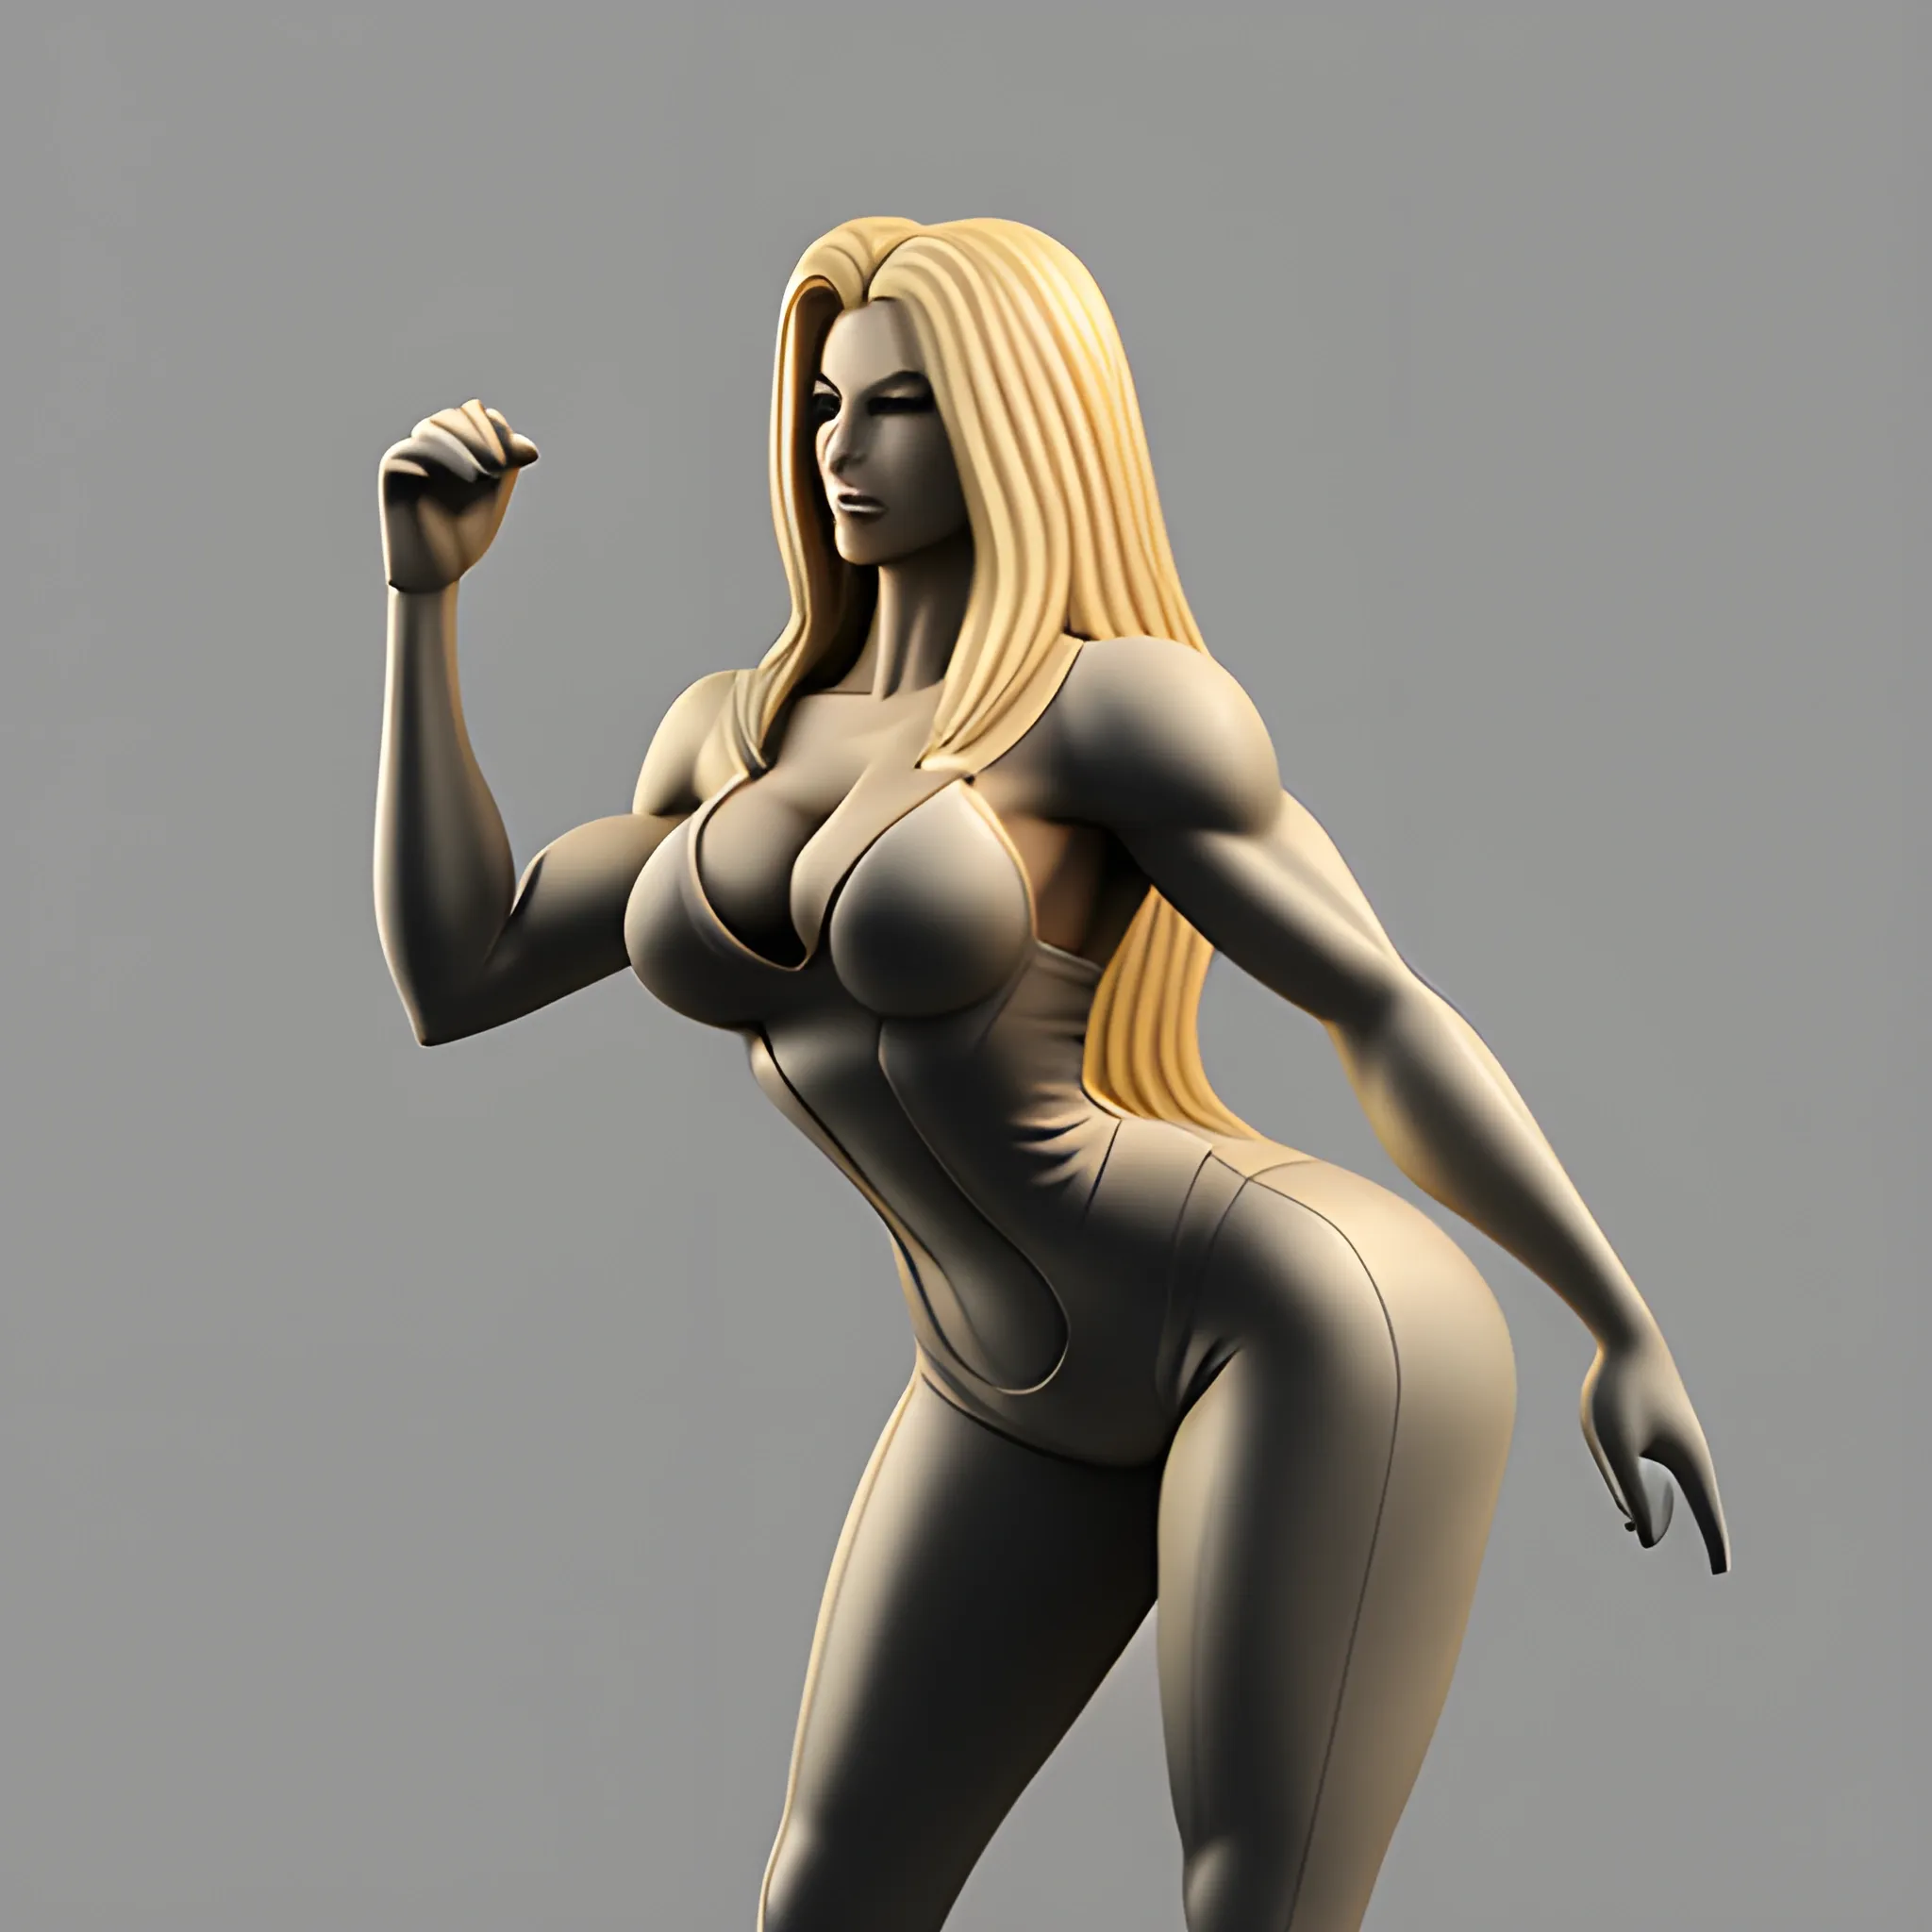 Slightly muscular, very long and thick blonde hair, dramatic hourglass figure, five-foot five-inches tall, wearing high-heels, flattering business suit, 3D, Pencil Sketch, 3D